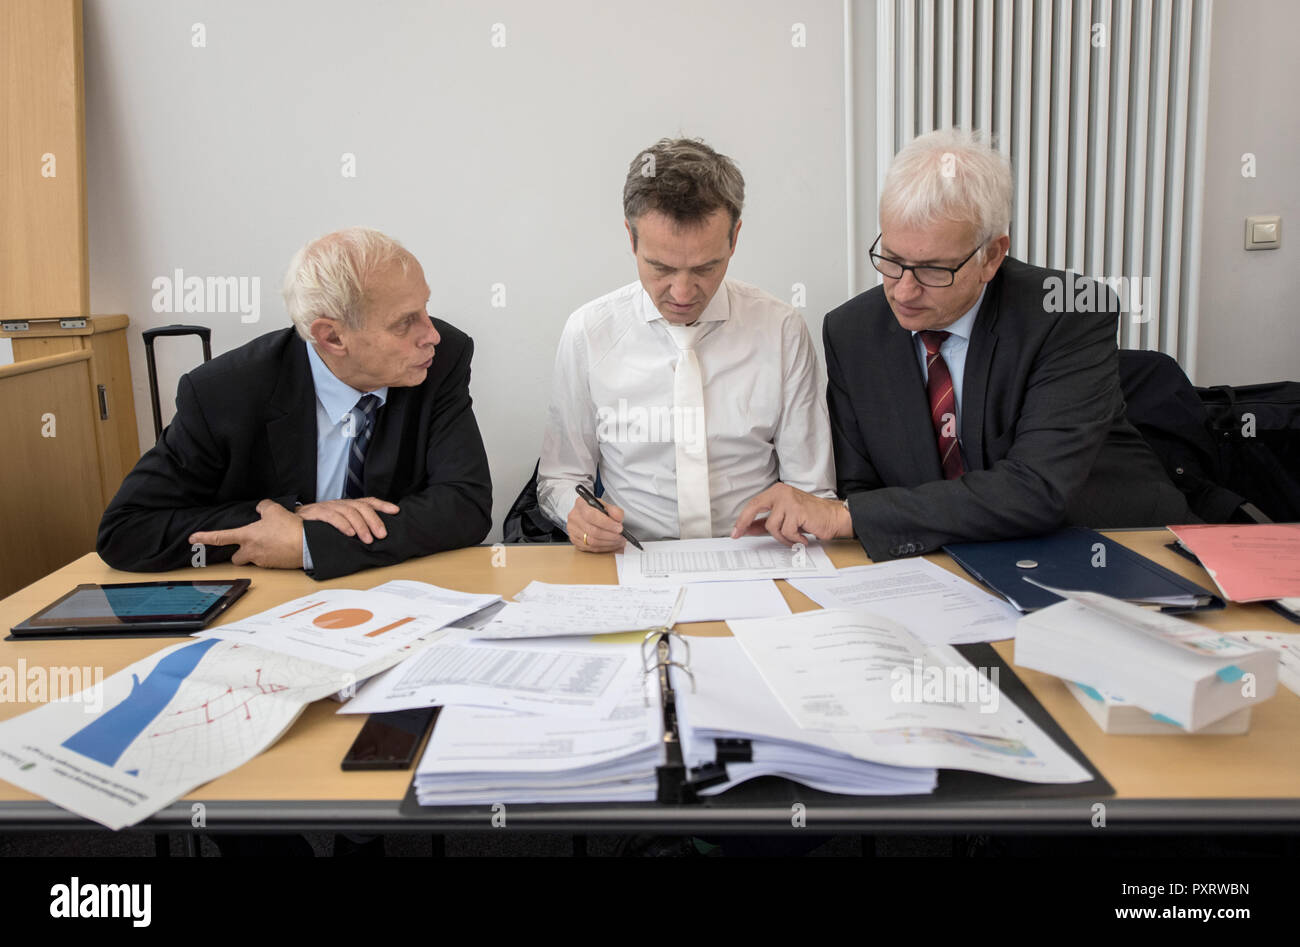 24 October 2018, Rhineland-Palatinate, Mainz: Axel Friedrich (l-r), consultant for the managing directors of Deutsche Umwelthilfe (DUH), Remo Klinger, specialist lawyer for administrative law, and Jürgen Resch, managing director of Deutsche Umwelthilfe (DUH), are sitting in the courtroom before the start of negotiations. The court is negotiating a possible ban on diesel driving in the state capital of Rhineland-Palatinate. The case concerns a complaint by Deutsche Umwelthilfe (DUH) against the city of Mainz concerning exceeded limit values for nitrogen dioxide (NO2) in the air. Photo: Andreas  Stock Photo